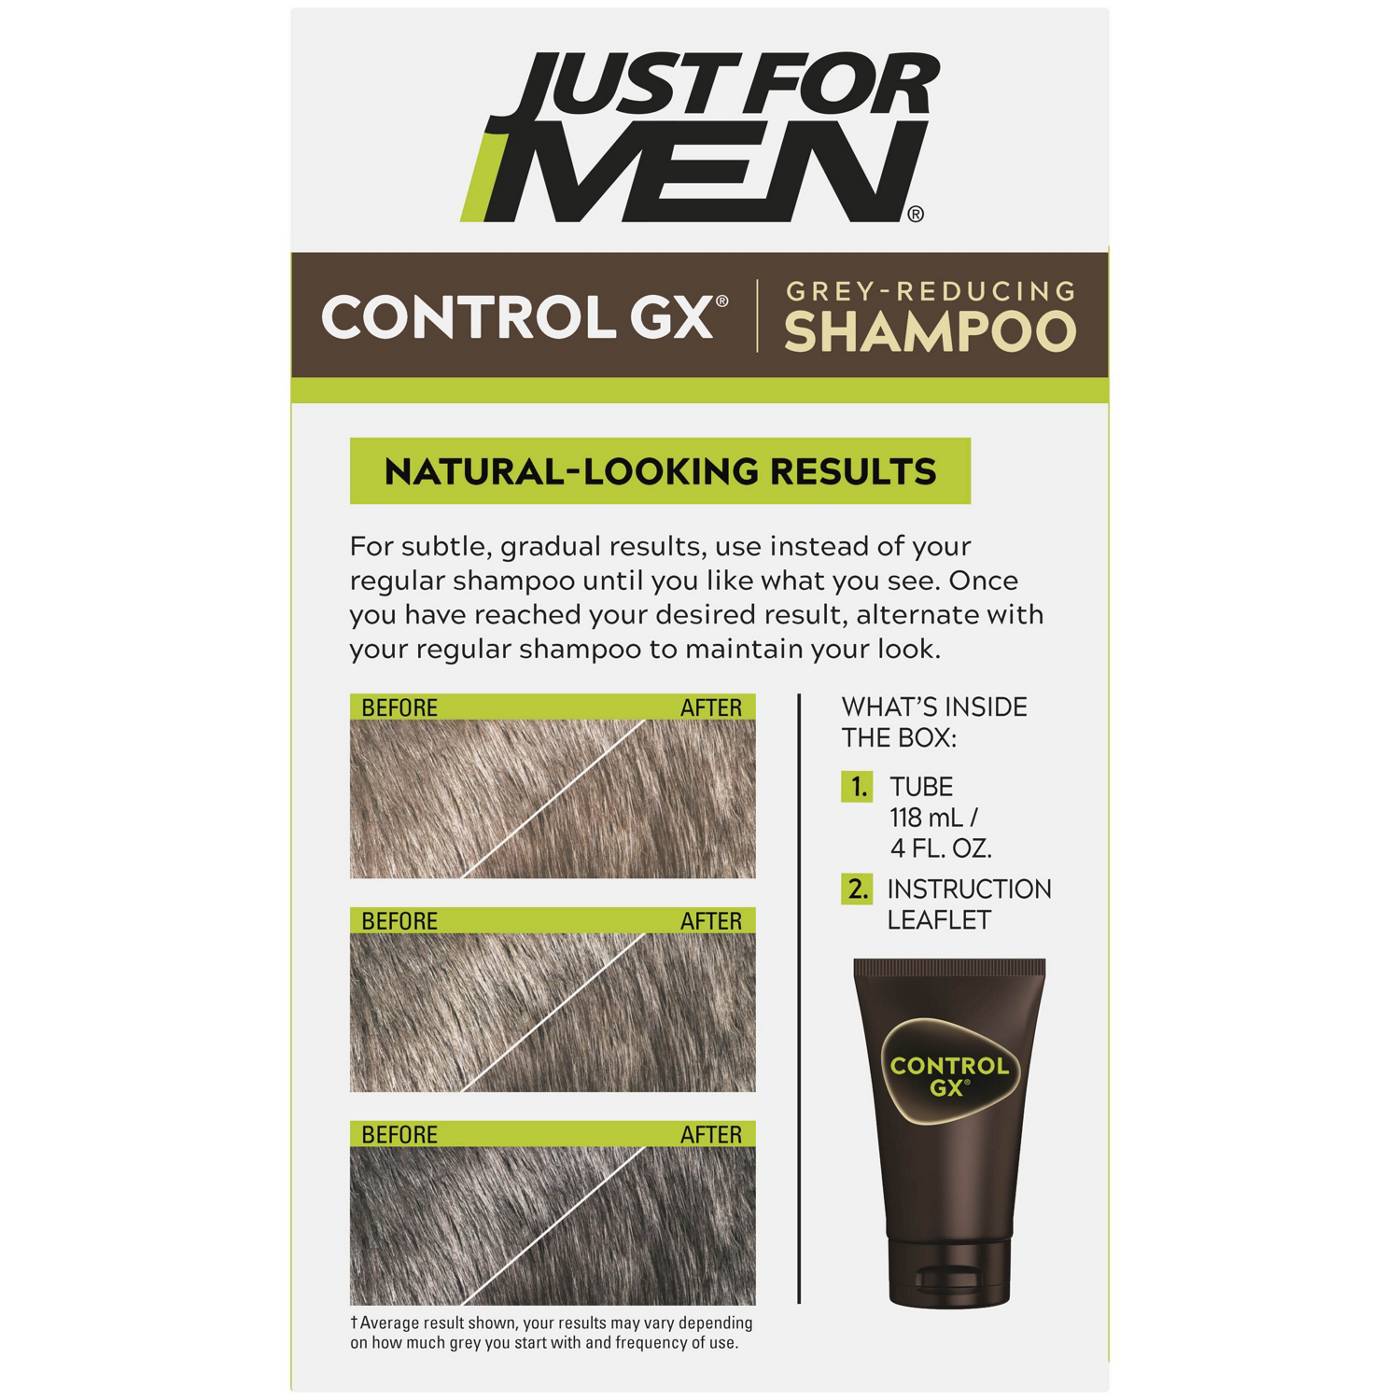 Just For Men Control GX Gray Reducing Shampoo; image 2 of 6